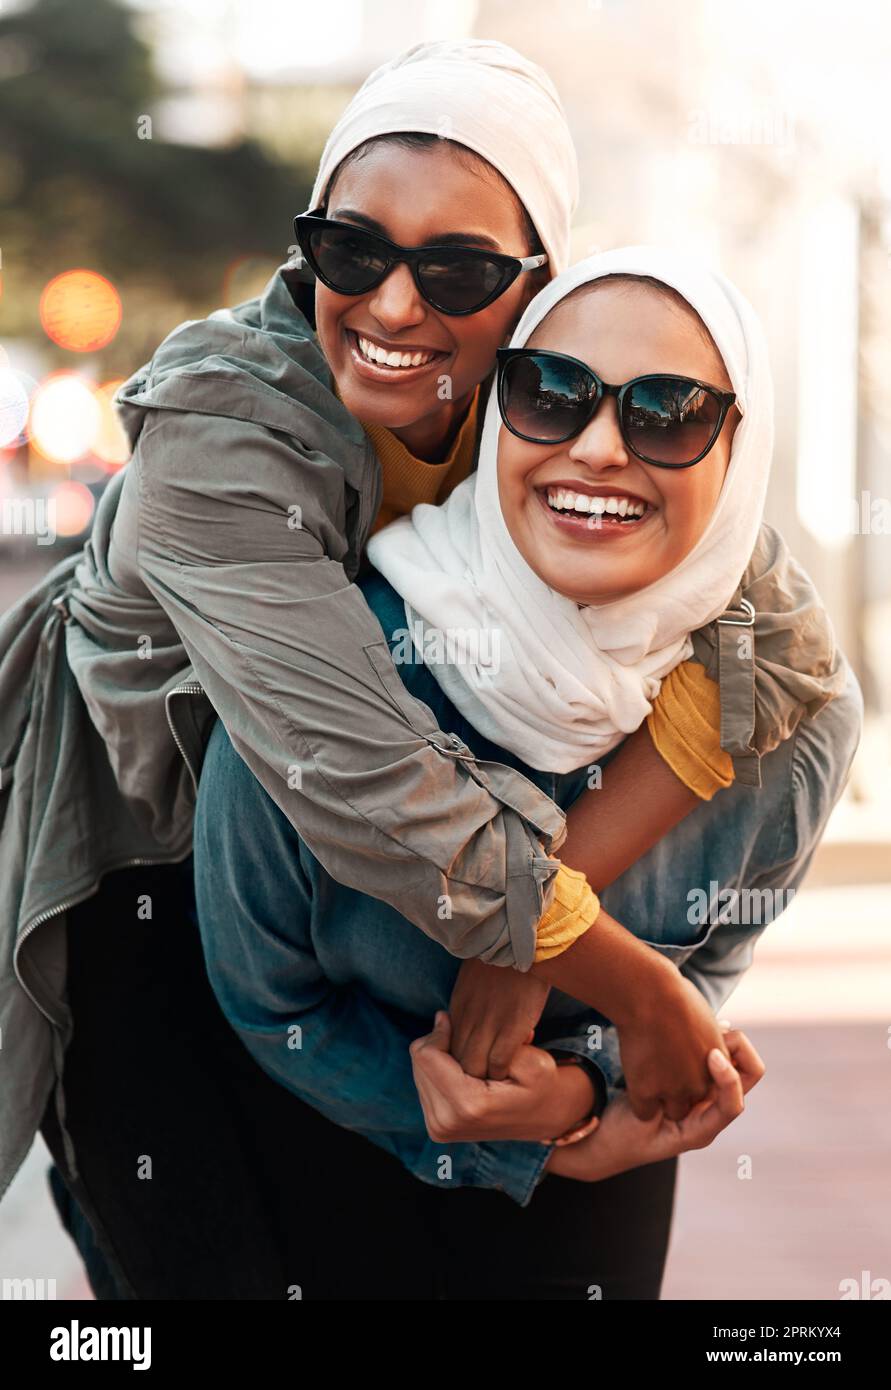 Quality time with friends is never time wasted. an attractive young woman wearing sunglasses and a headscarf while giving her female friend a piggybac Stock Photo